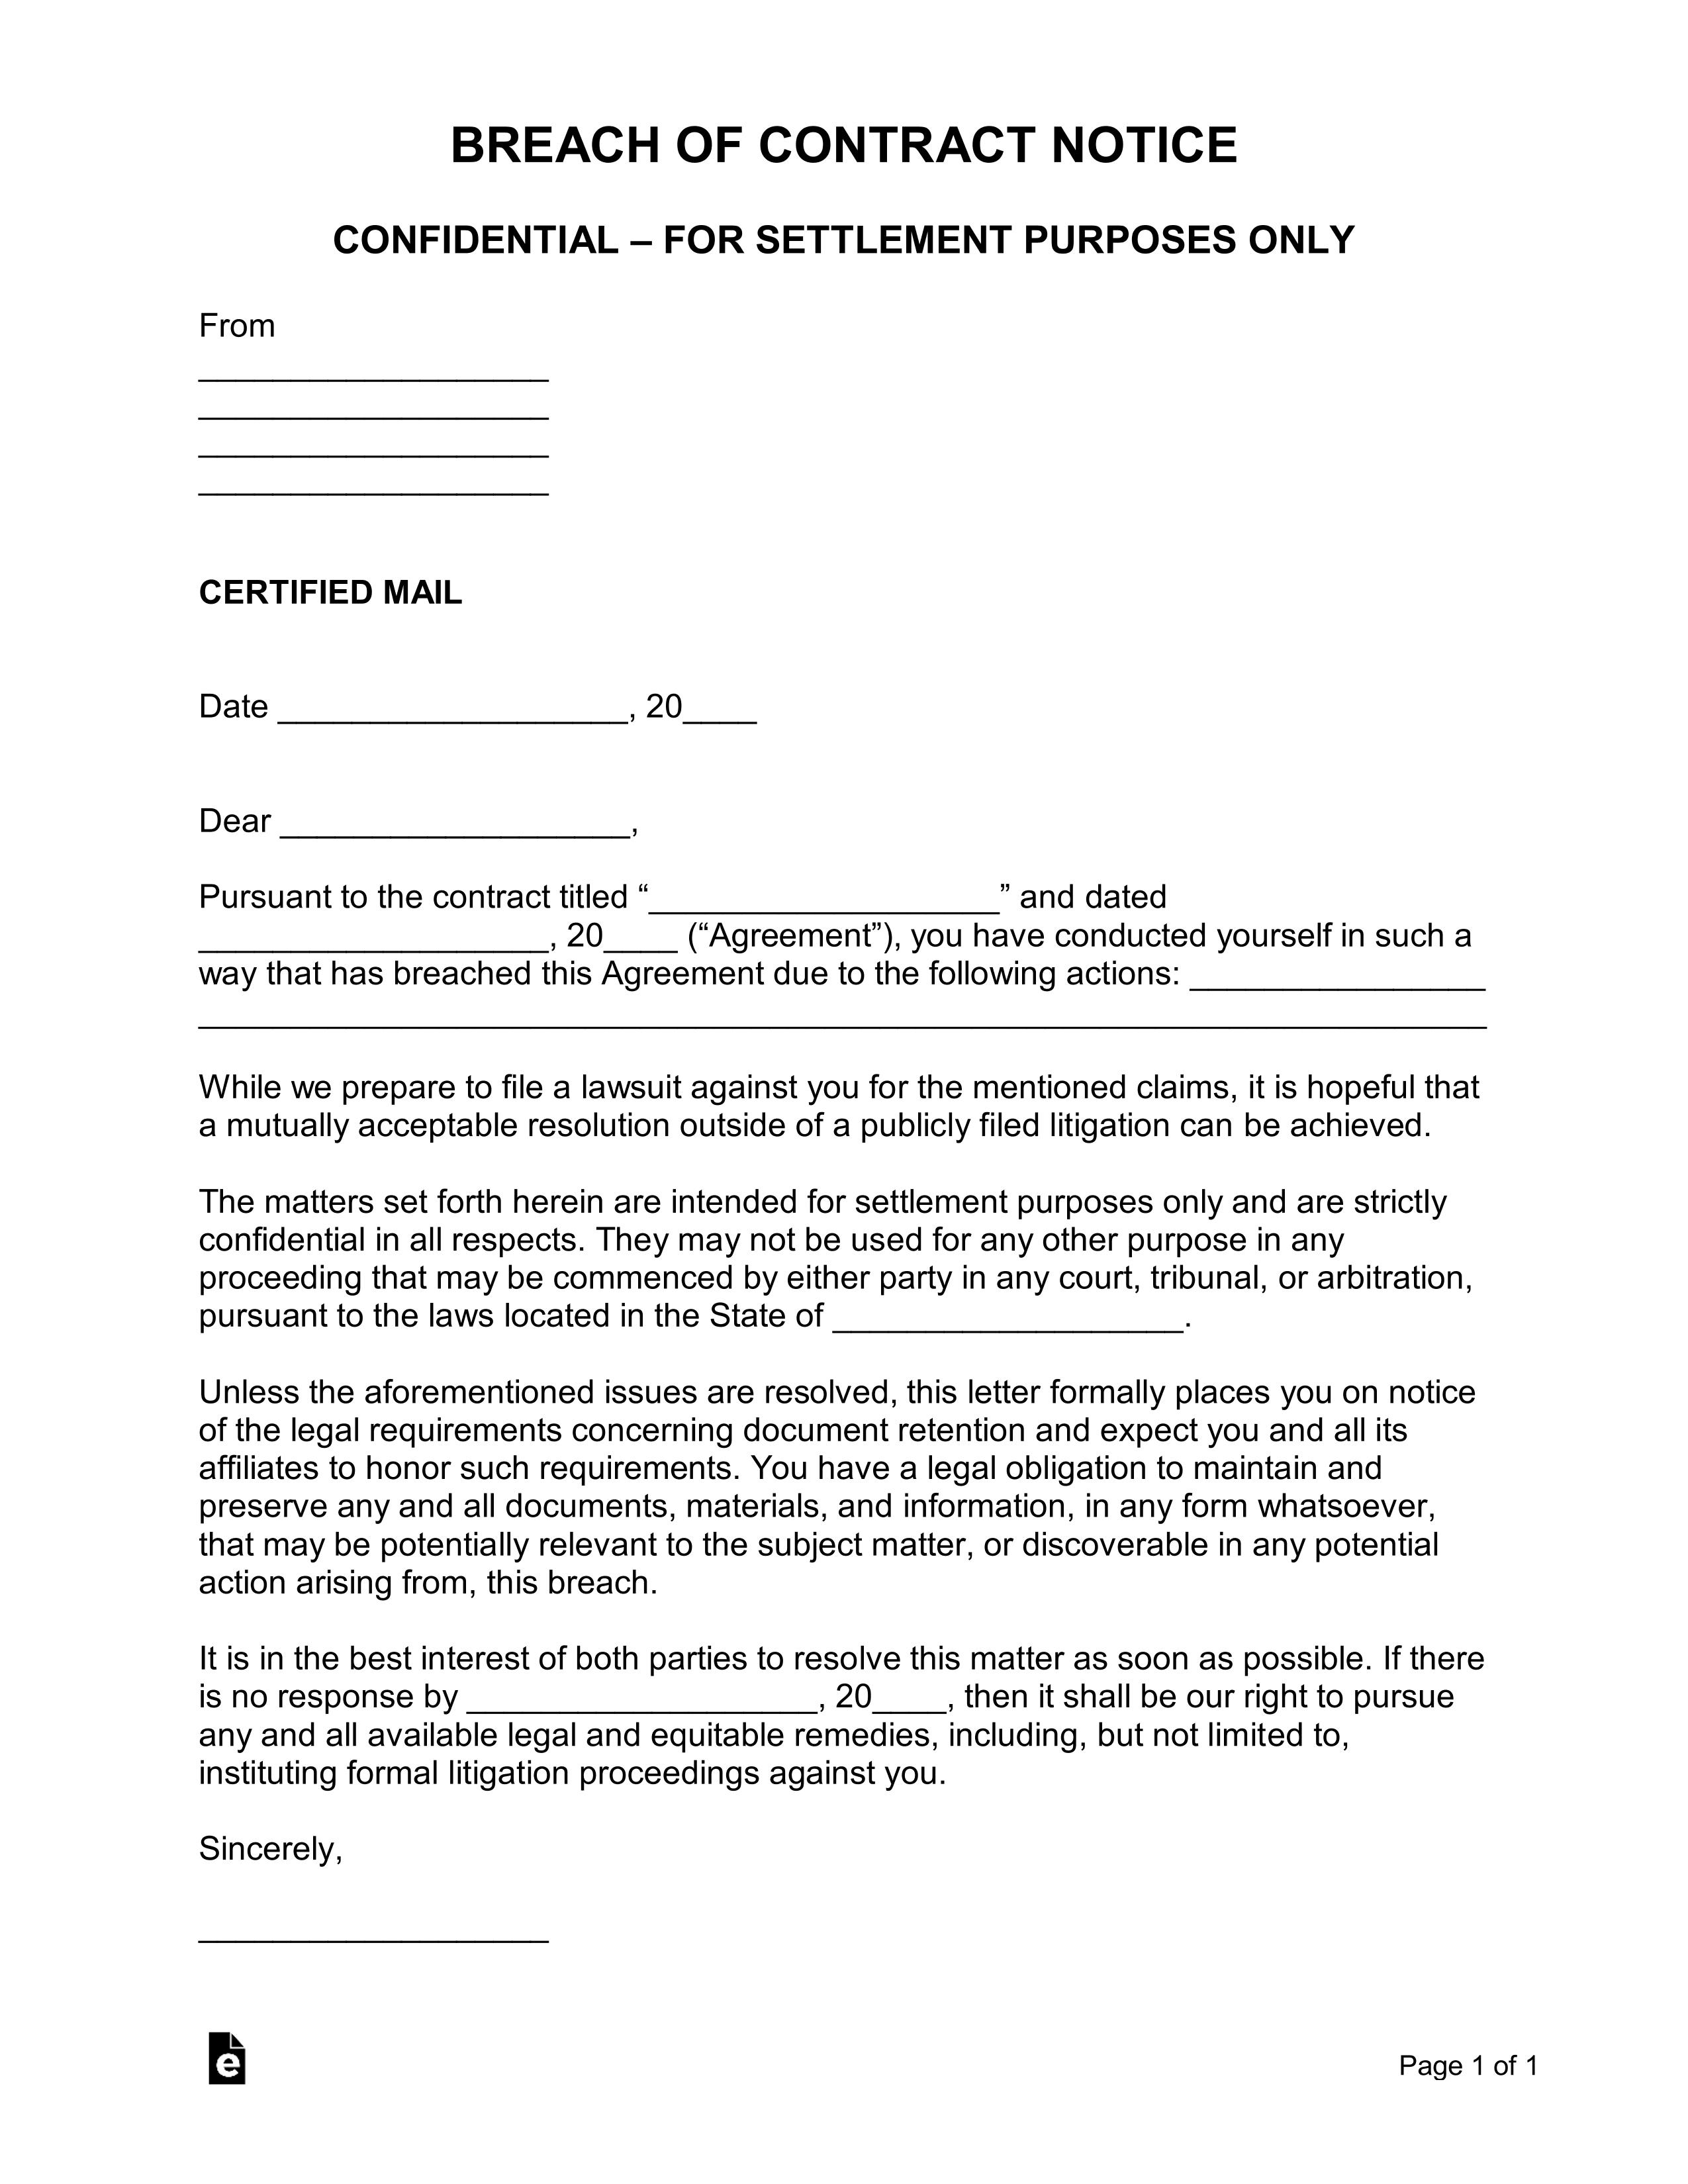 Breach of Contract Demand Letter Template